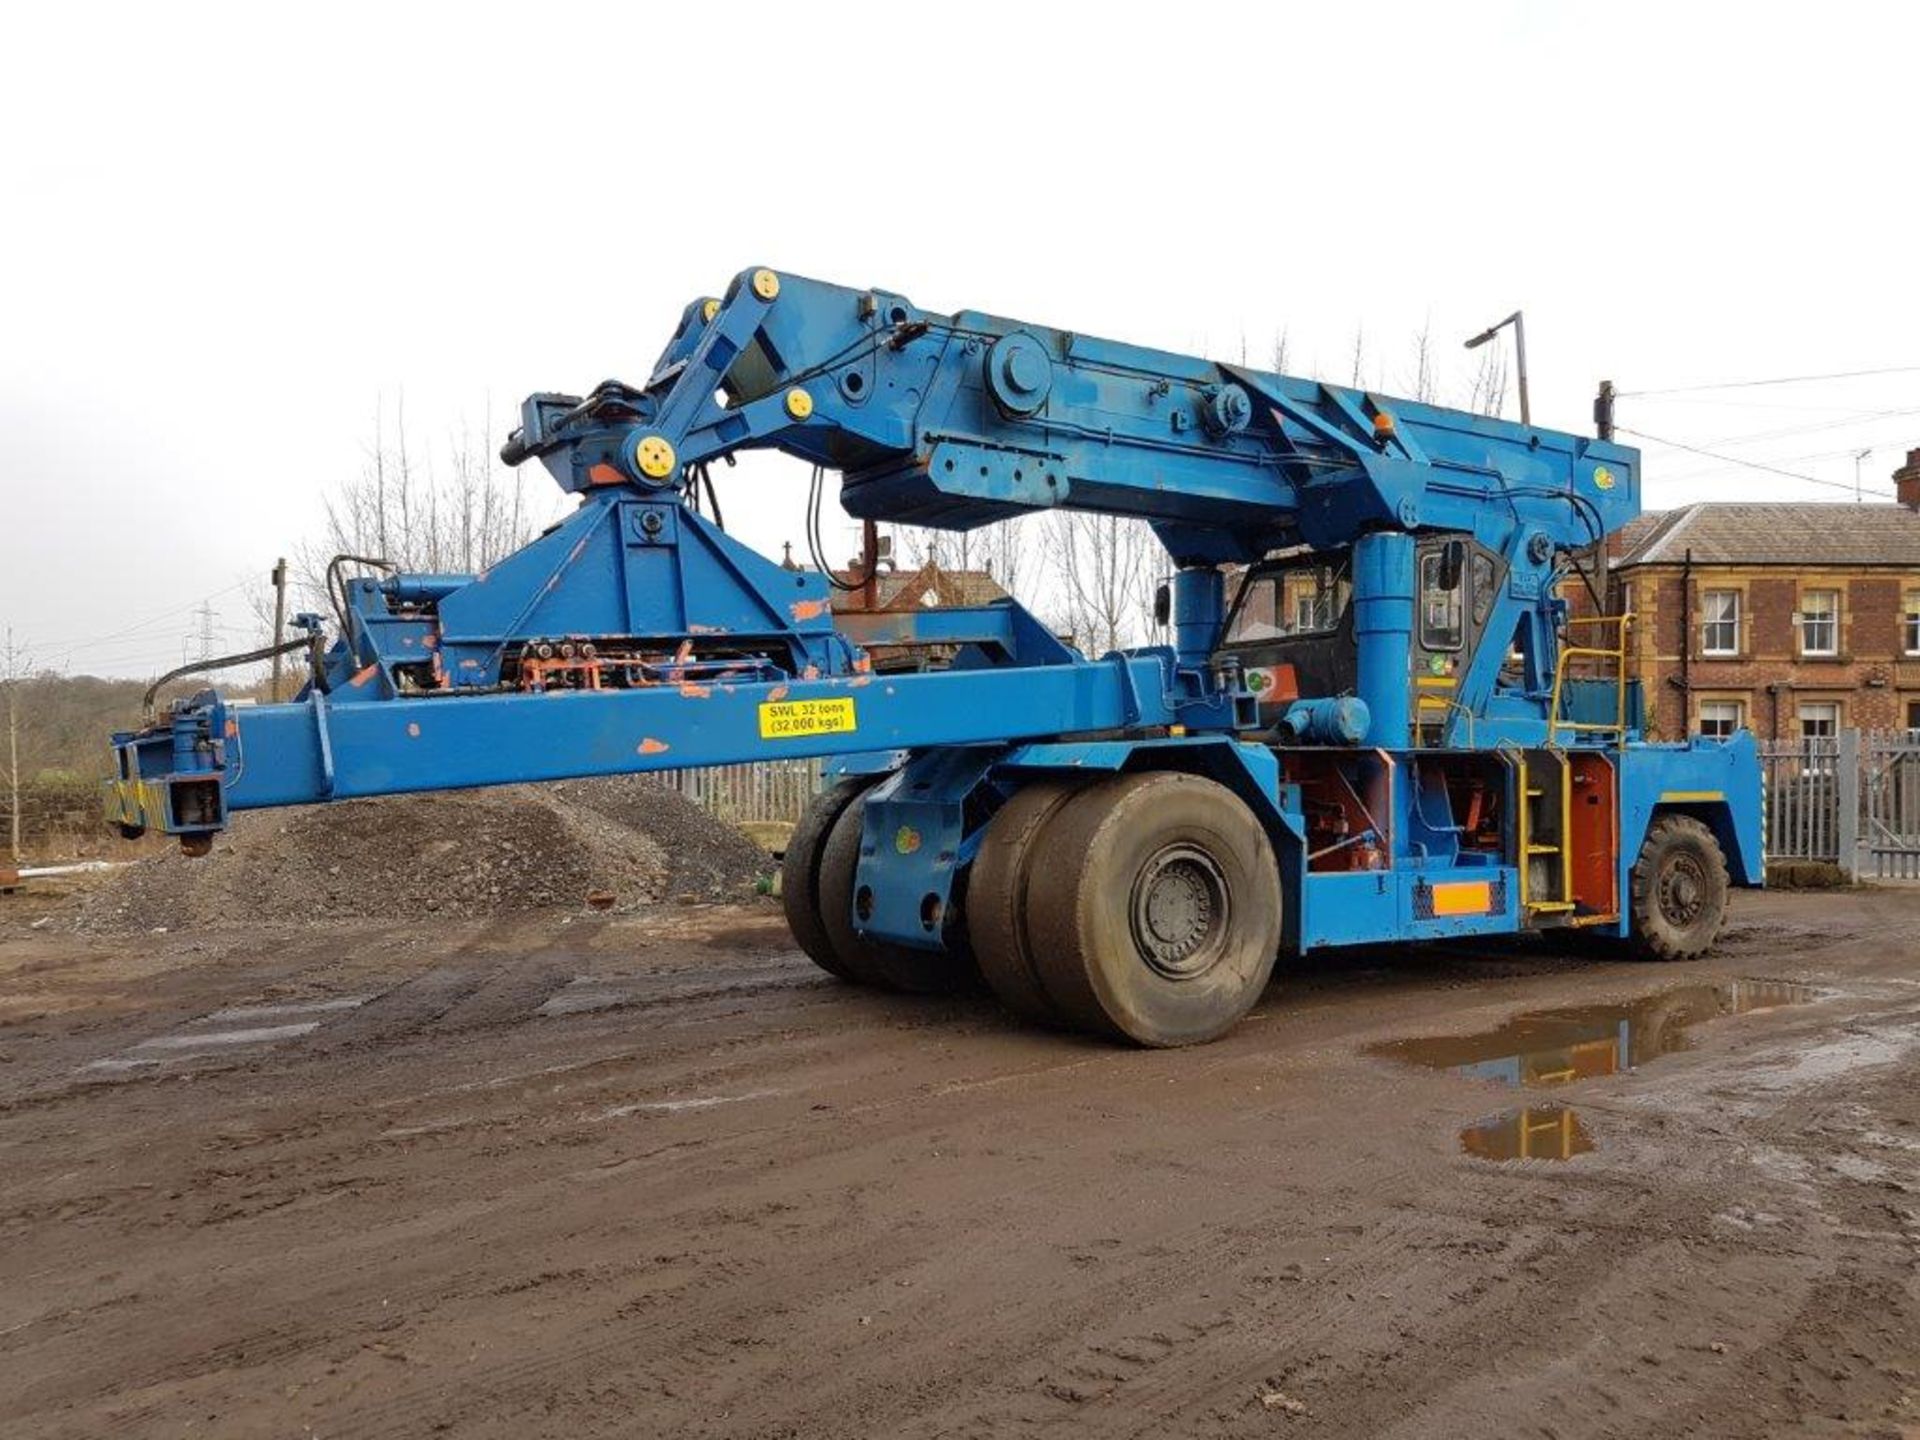 Belotti Container Reach Stacker Direct from work, 63 tonnes in weight and swl 32 tonnes